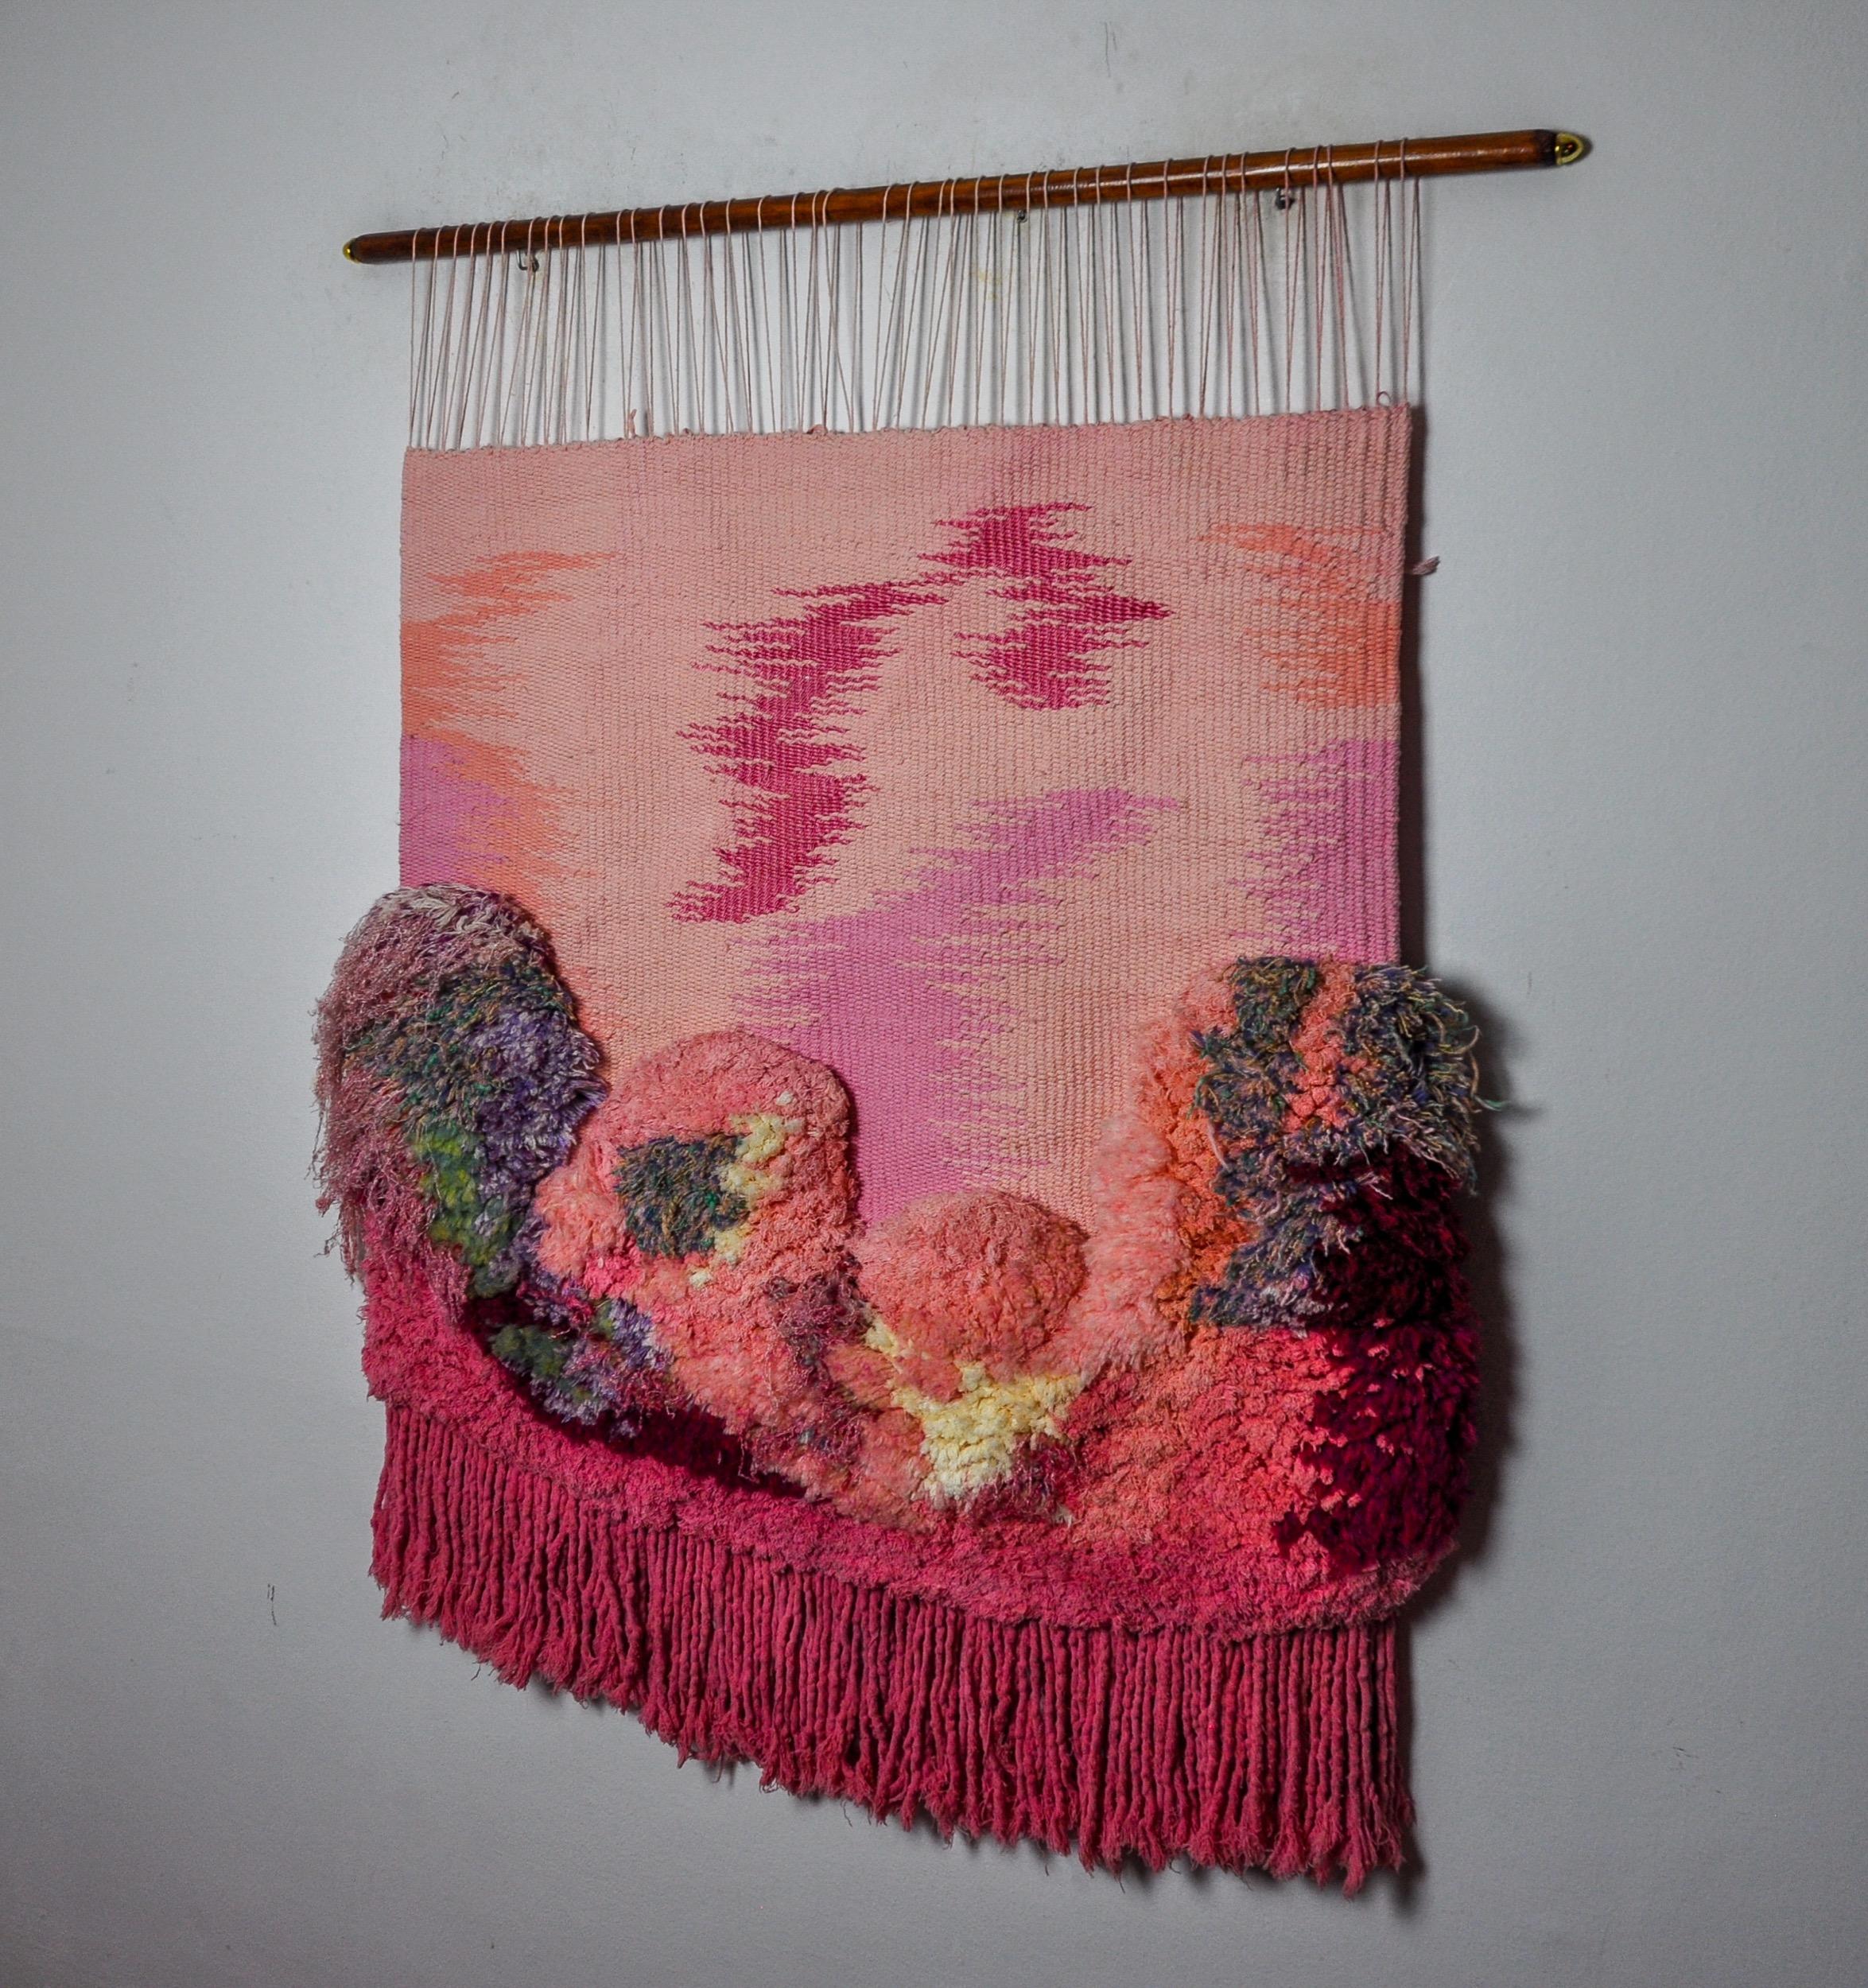 Superb macramé wall tapestry, spain, 1970s.

Large format.

Handcrafted tapestry composed of different textures and materials creating unique patterns and reliefs.

All ropes and wires were made and assembled one by one by the